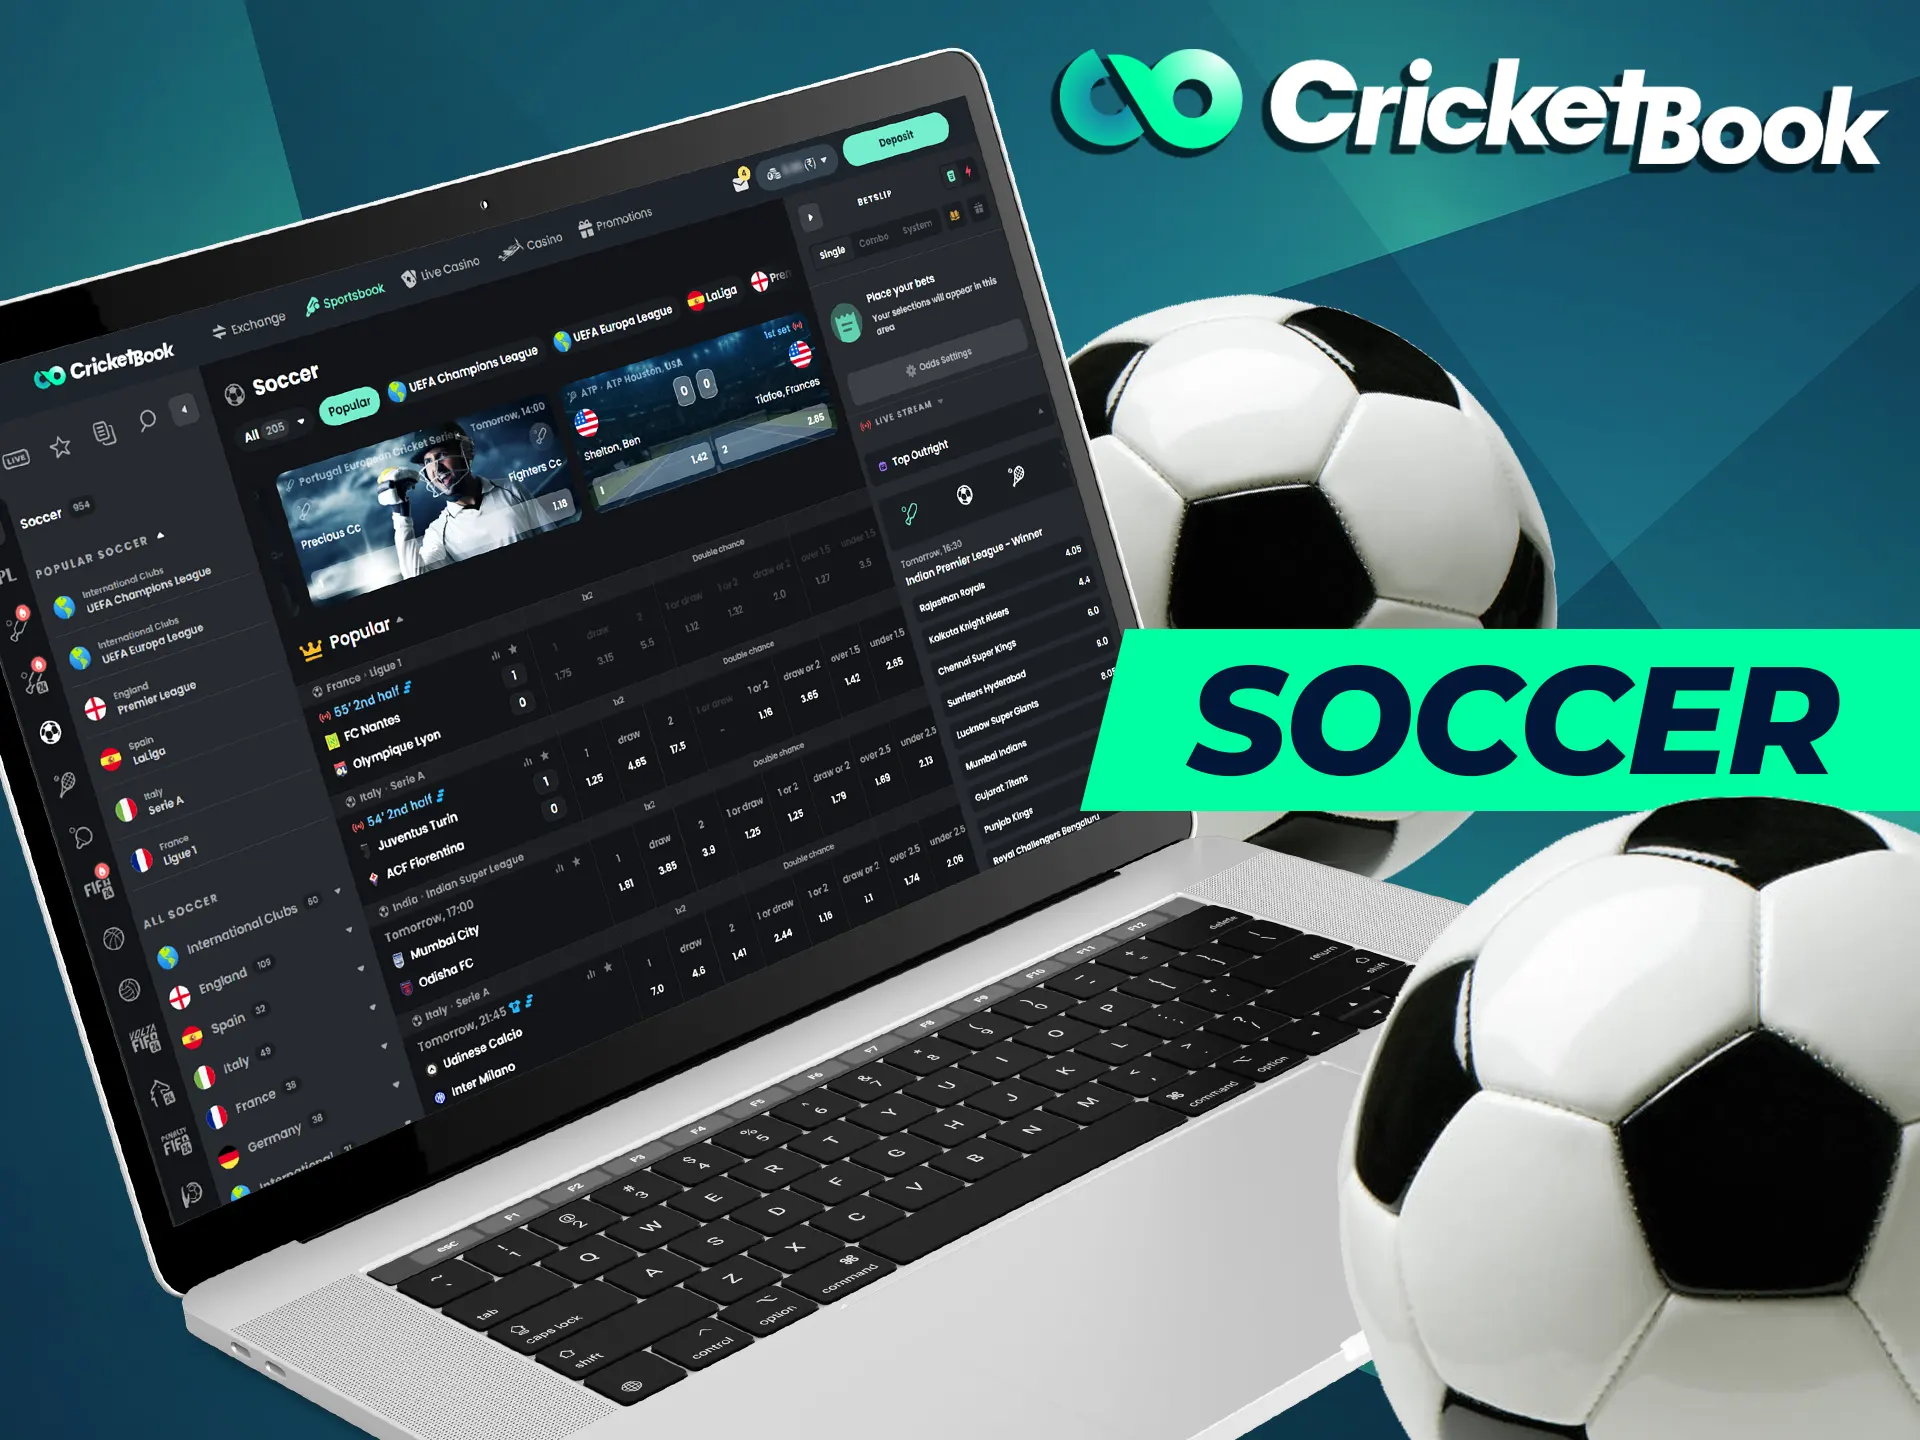 CricketBook offers a wide range of soccer betting opportunities.